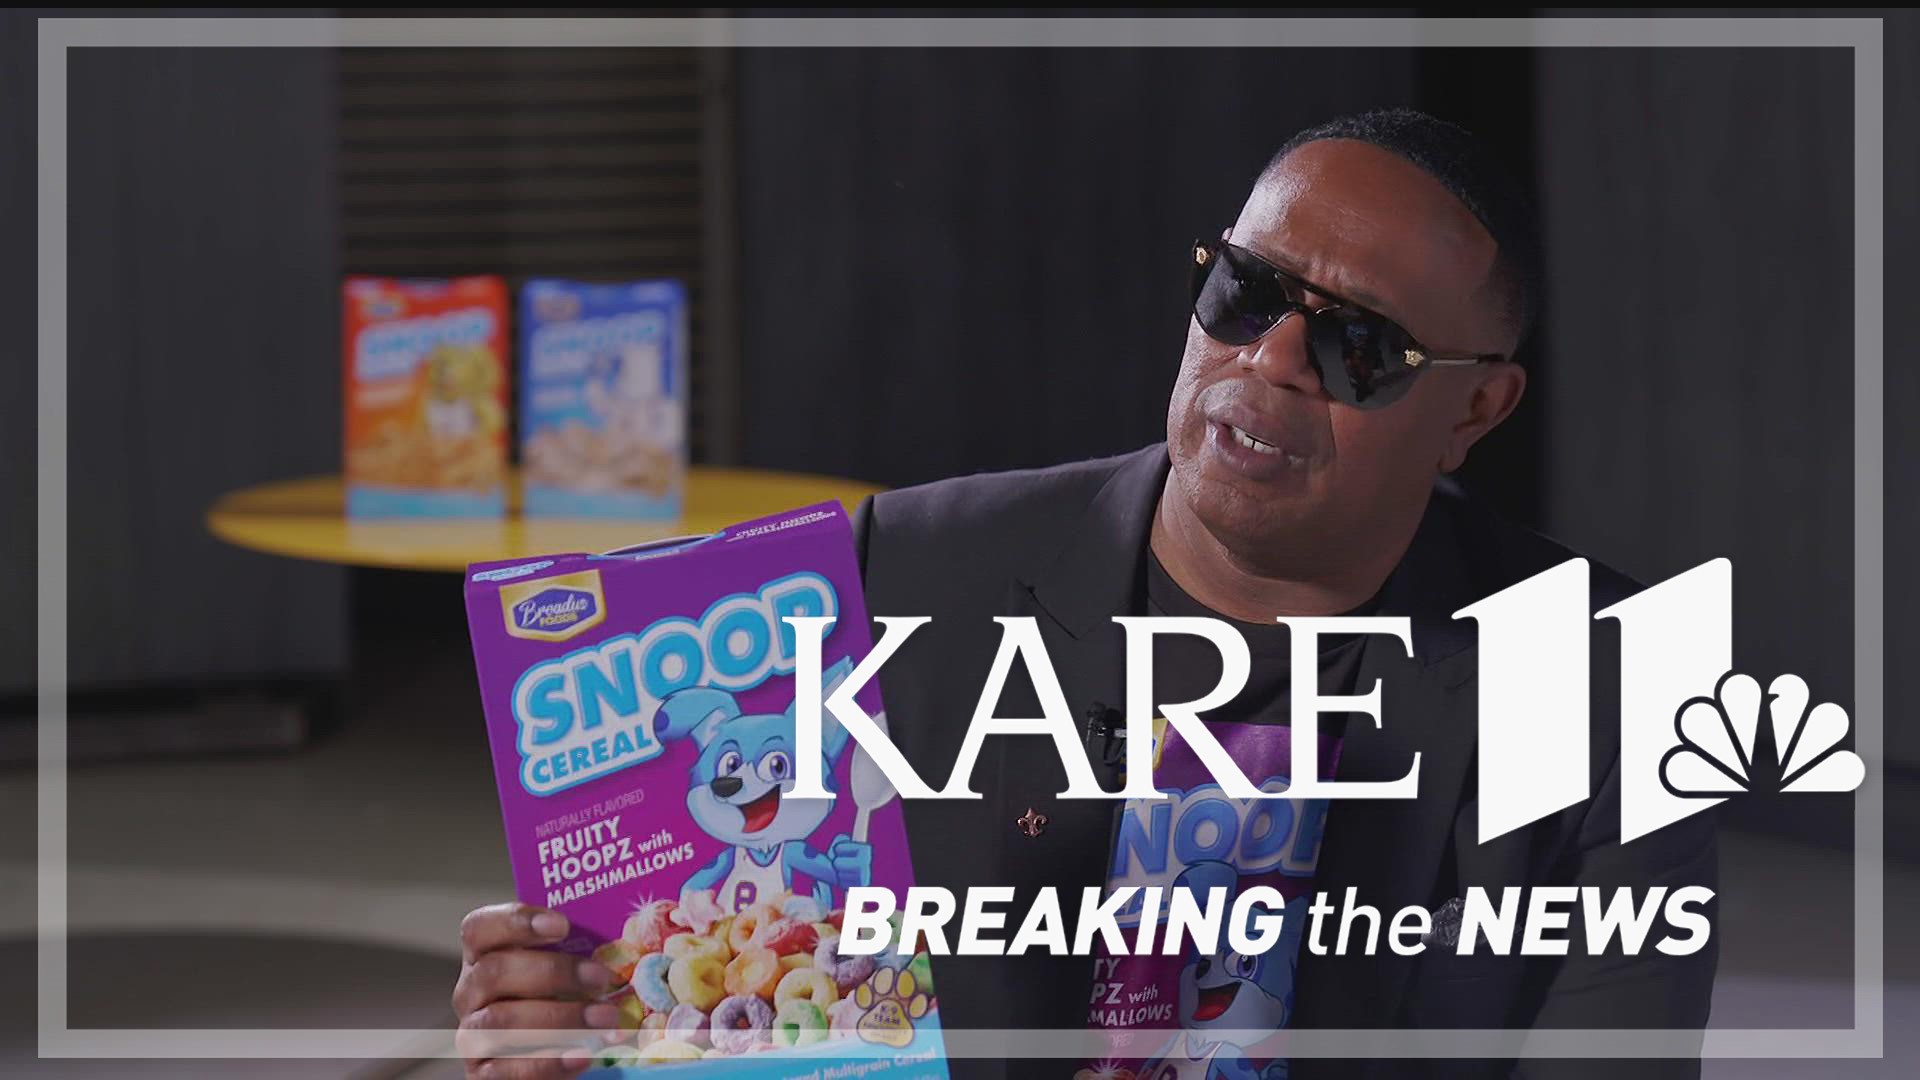 After meeting with Post Consumer Brands, rap legend Master P stopped by KARE 11 to announce the launch of Snoop Cereal.